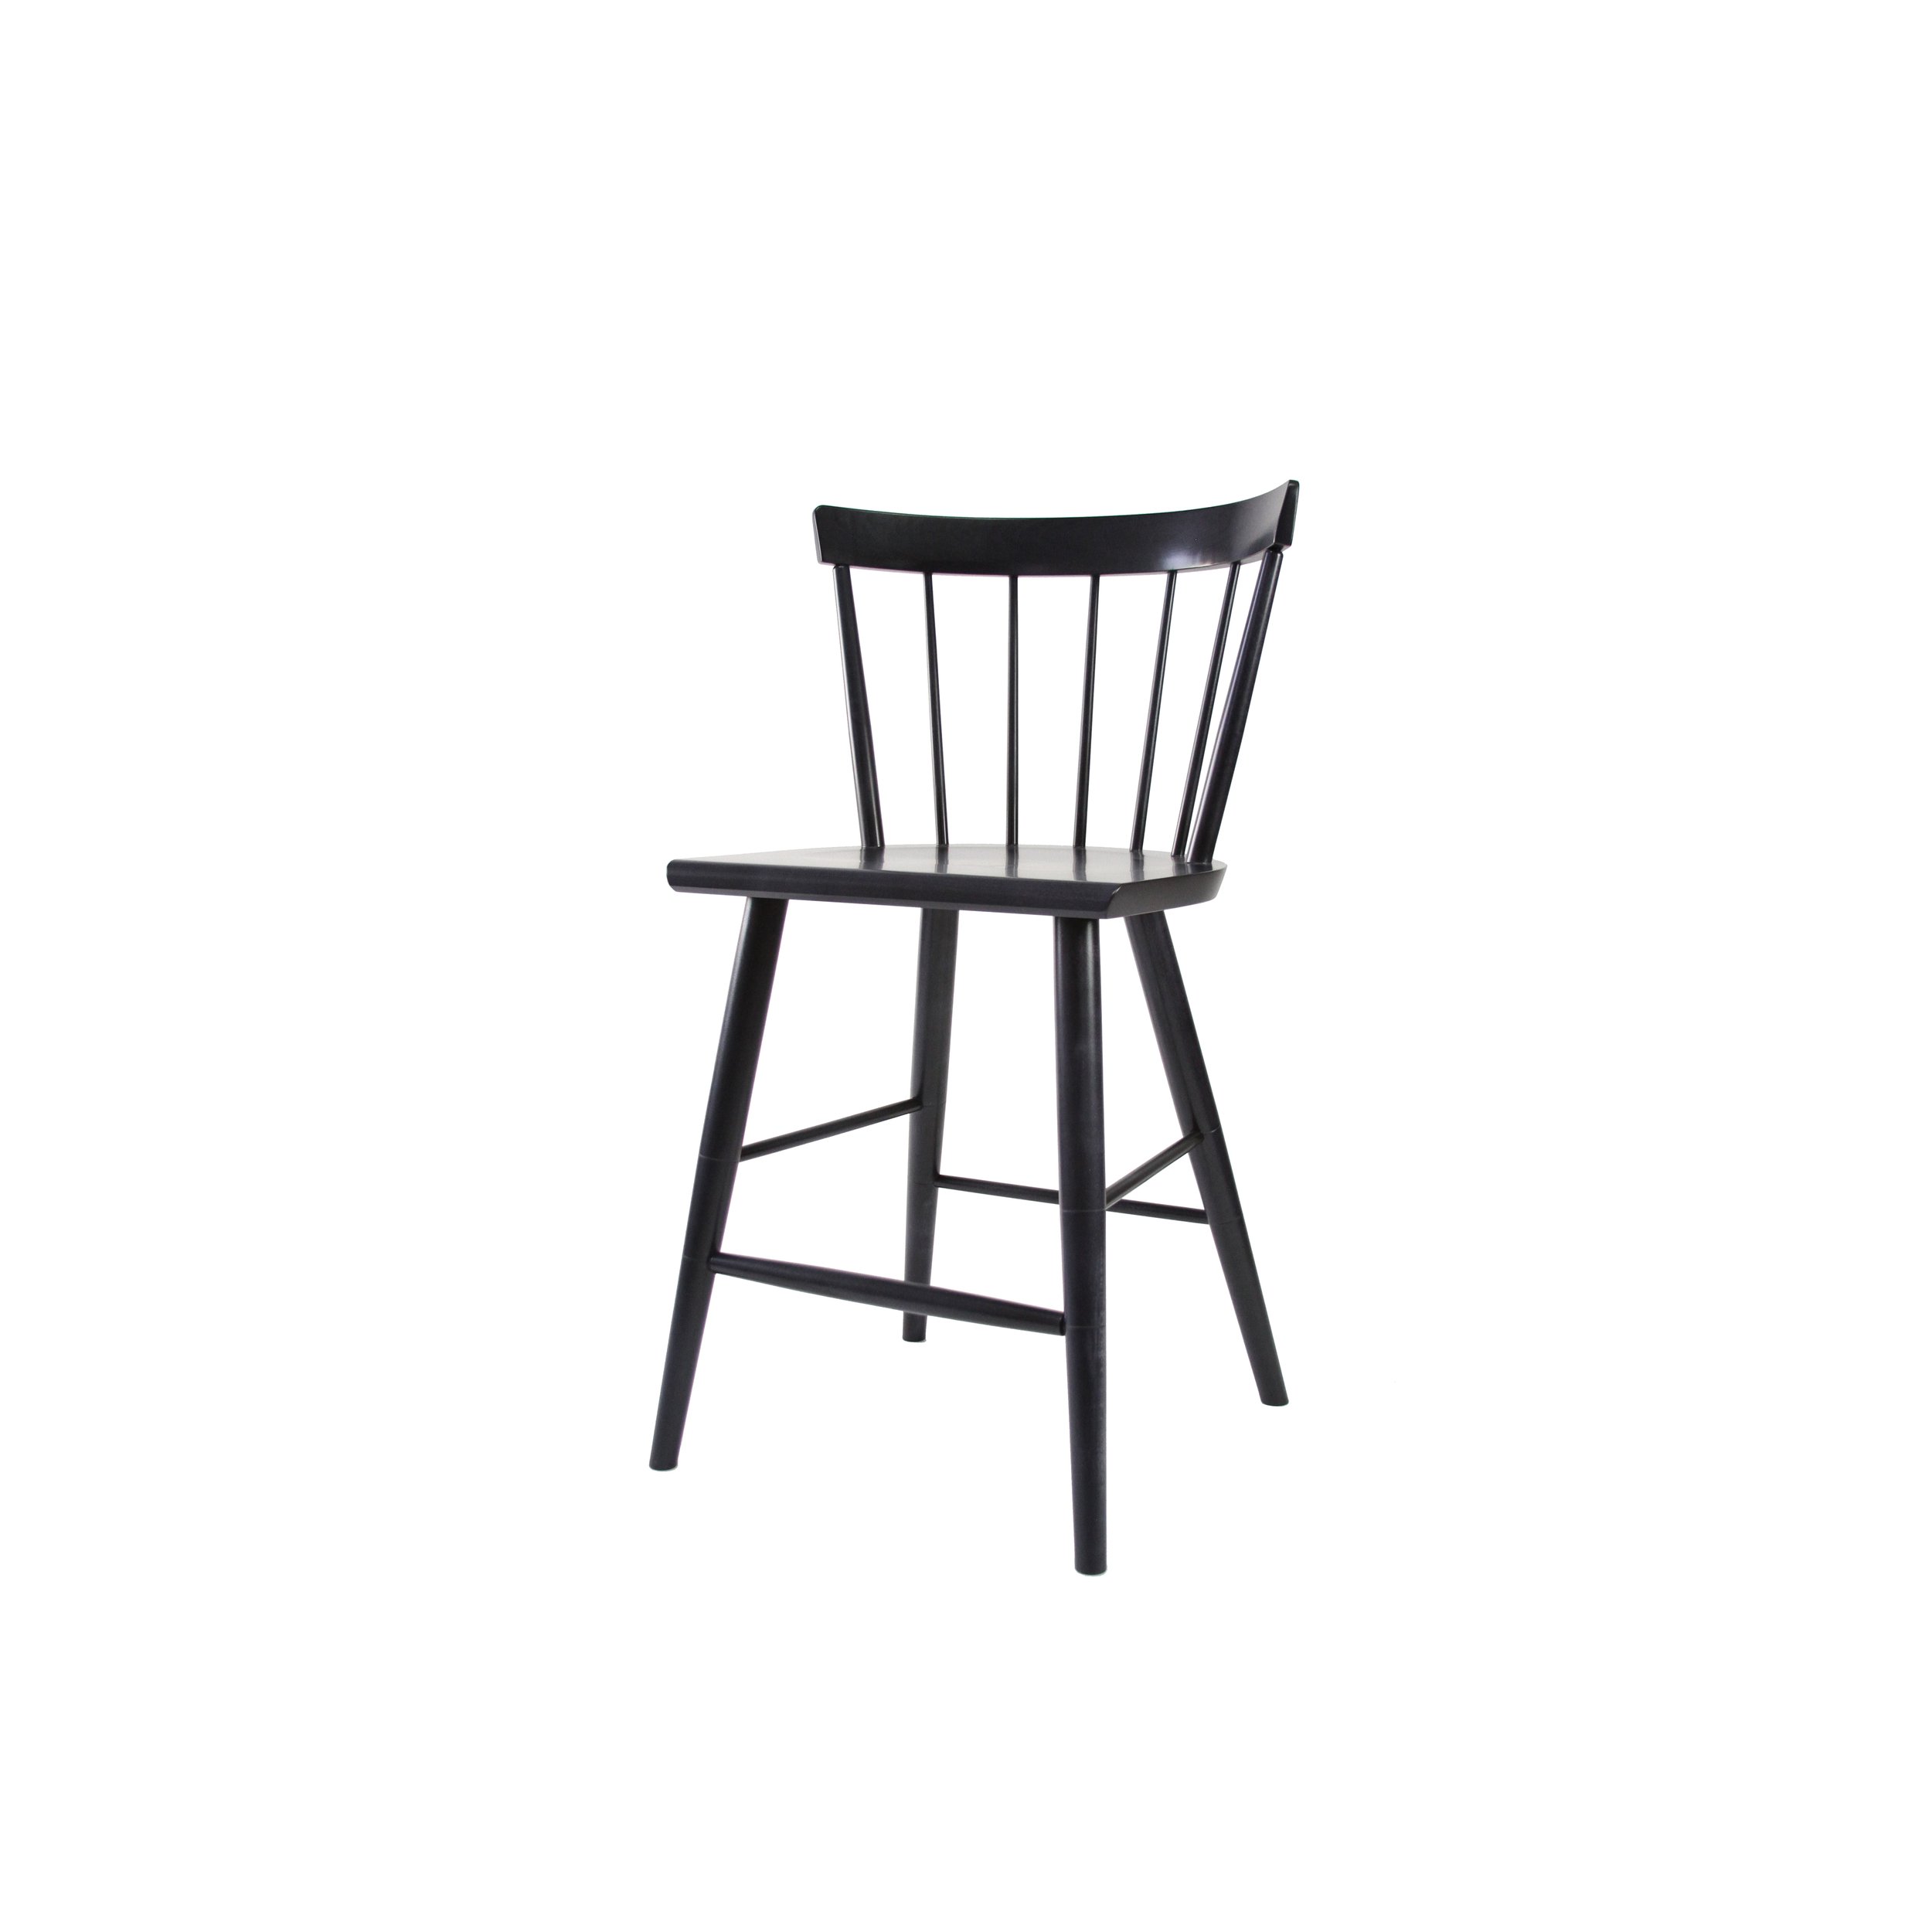 COLT COUNTER STOOL 24” - $1,208